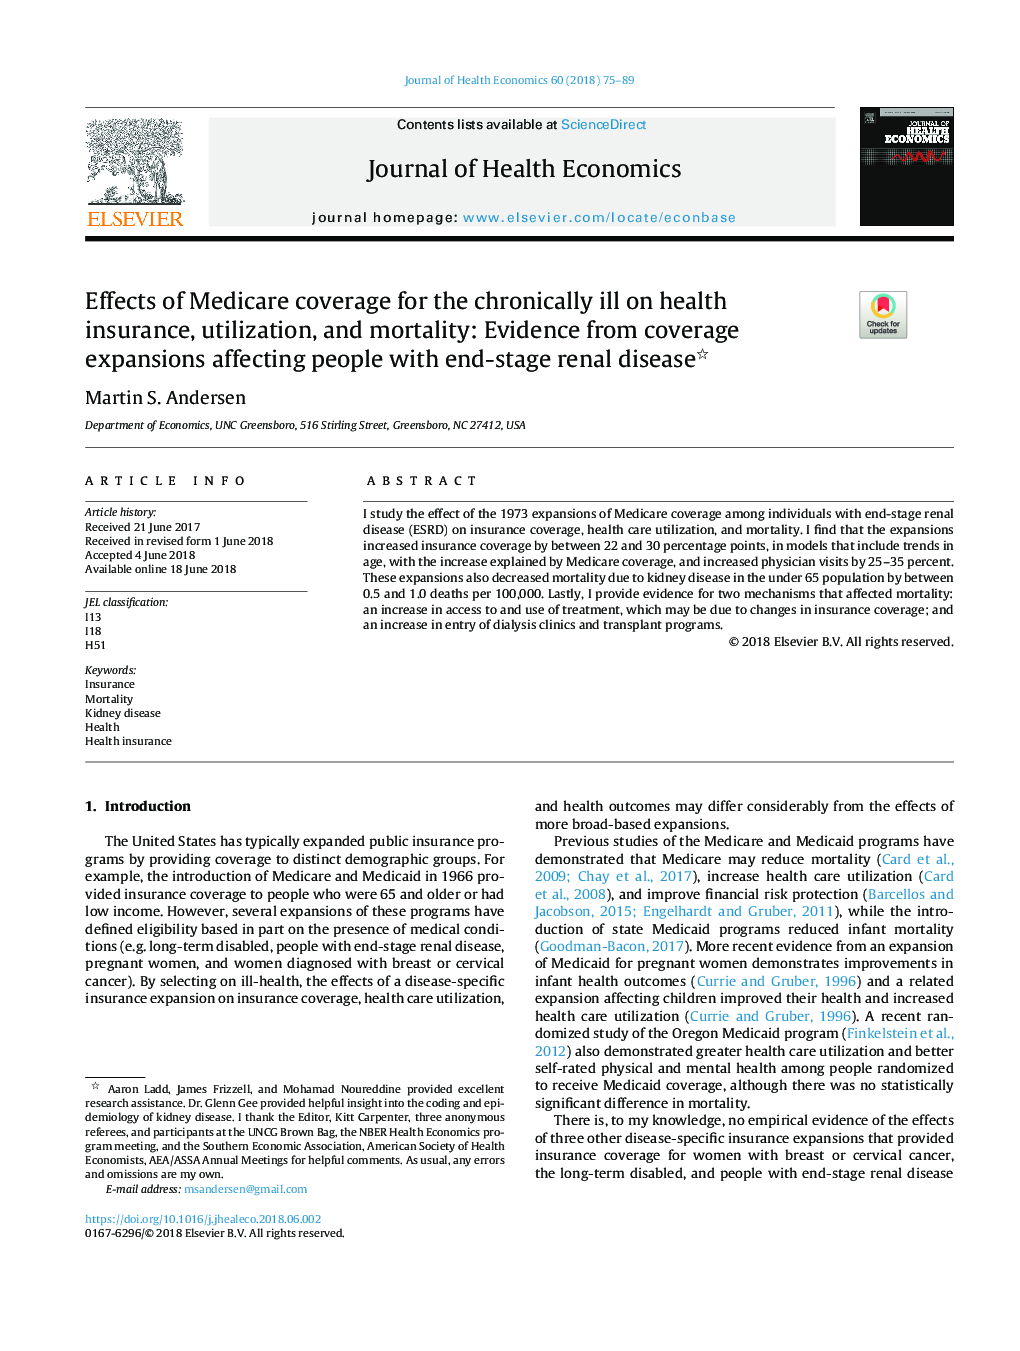 Effects of Medicare coverage for the chronically ill on health insurance, utilization, and mortality: Evidence from coverage expansions affecting people with end-stage renal disease